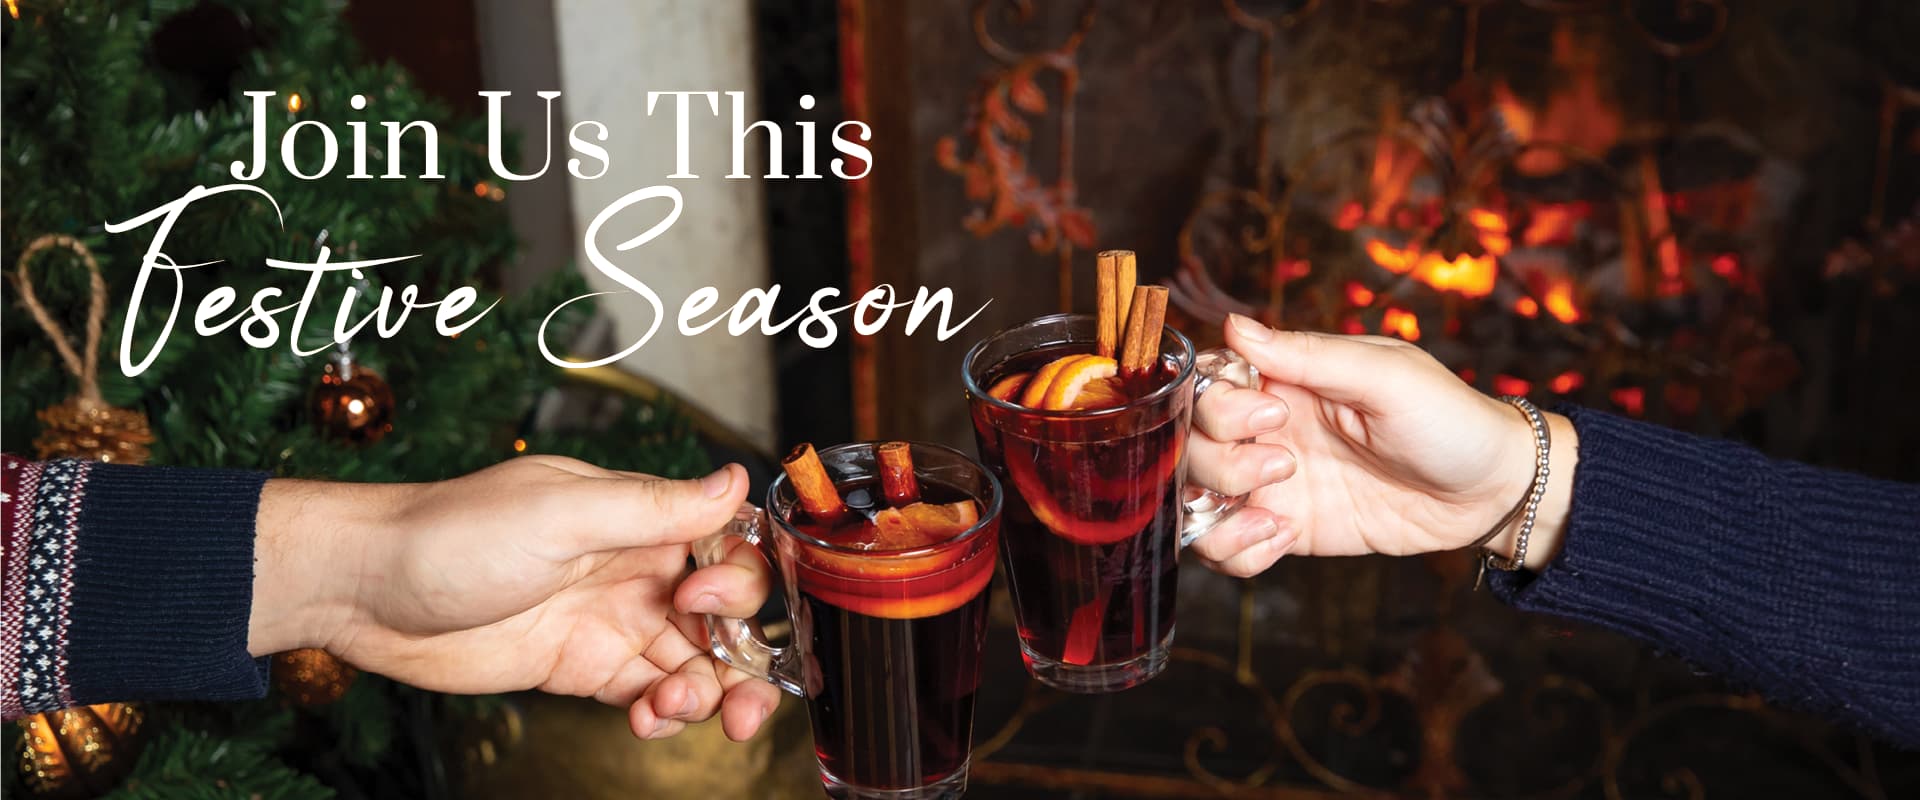 join us this festive season at Coach & Horses | Mulled Wine